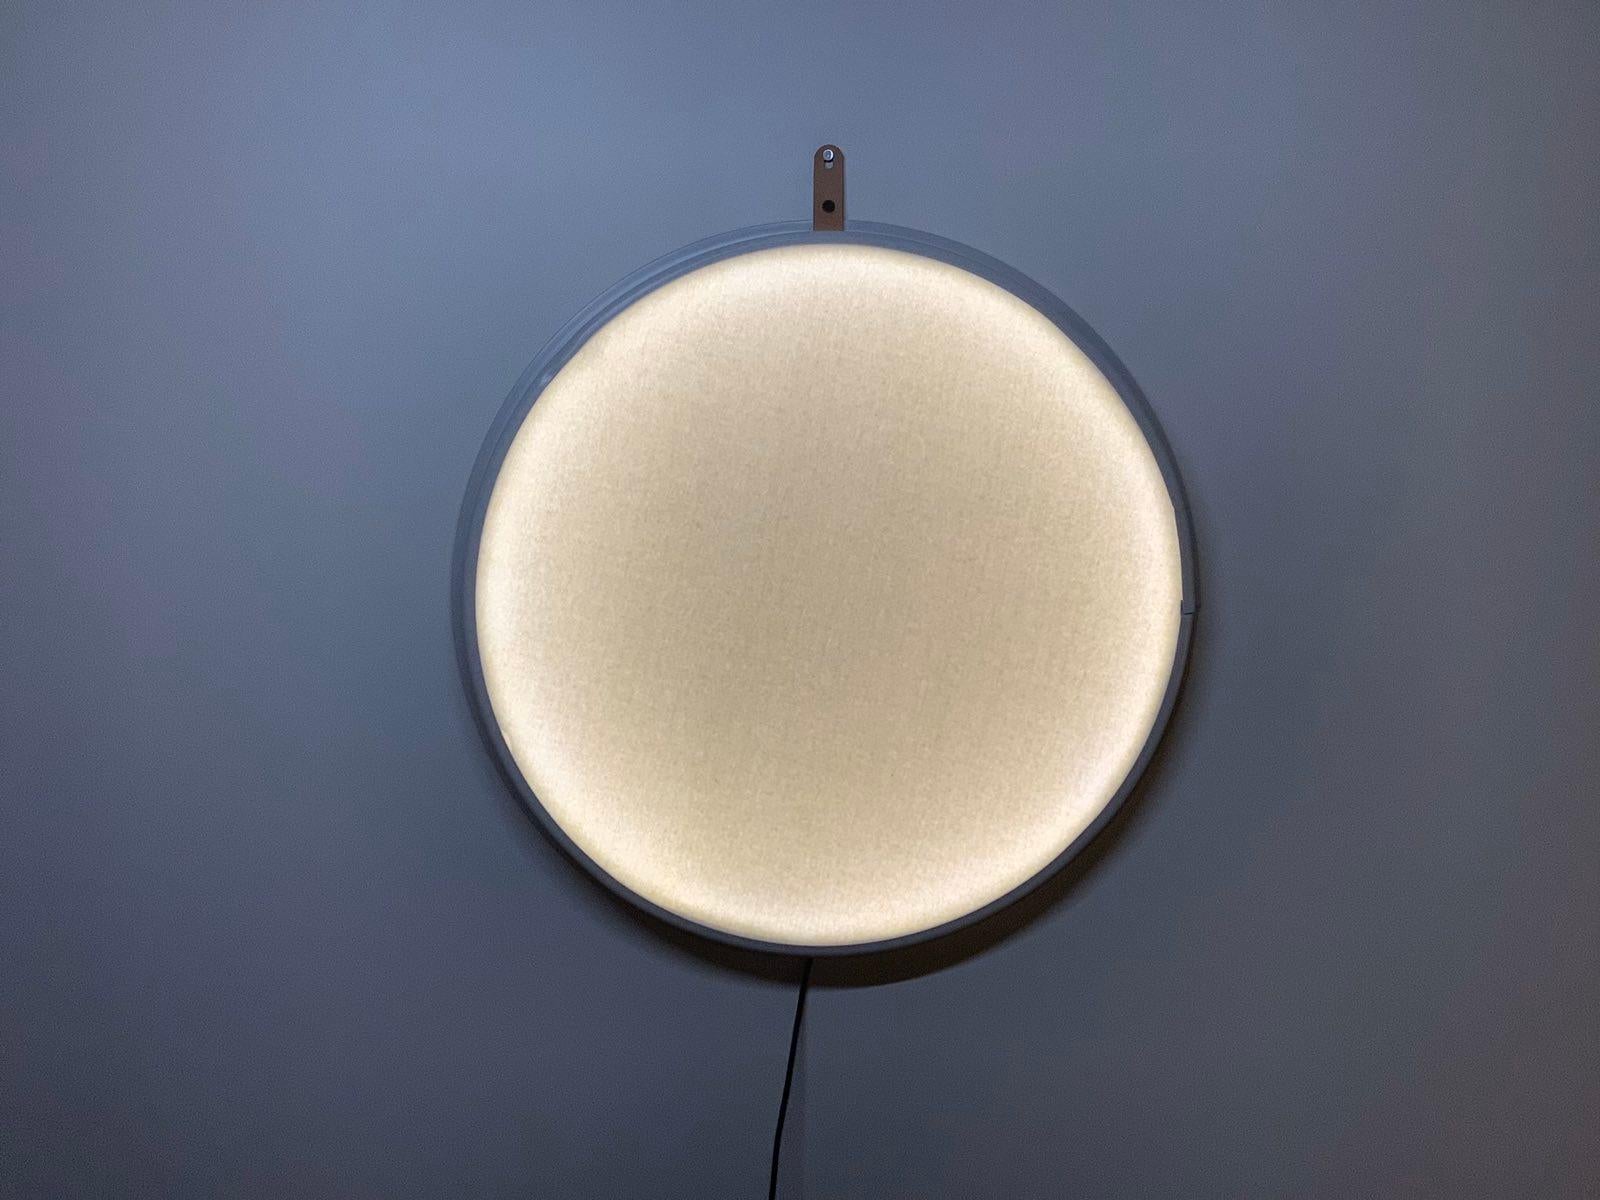 Selene wall lamp by Studio Lampent
Edition of 5
Dimensions: D 62 x H 6 cm
Materials: upcycled metal ring, acrylic, felt
Weight: 2.8 kg.

All our lamps can be wired according to each country. If sold to the USA it will be wired for the USA for